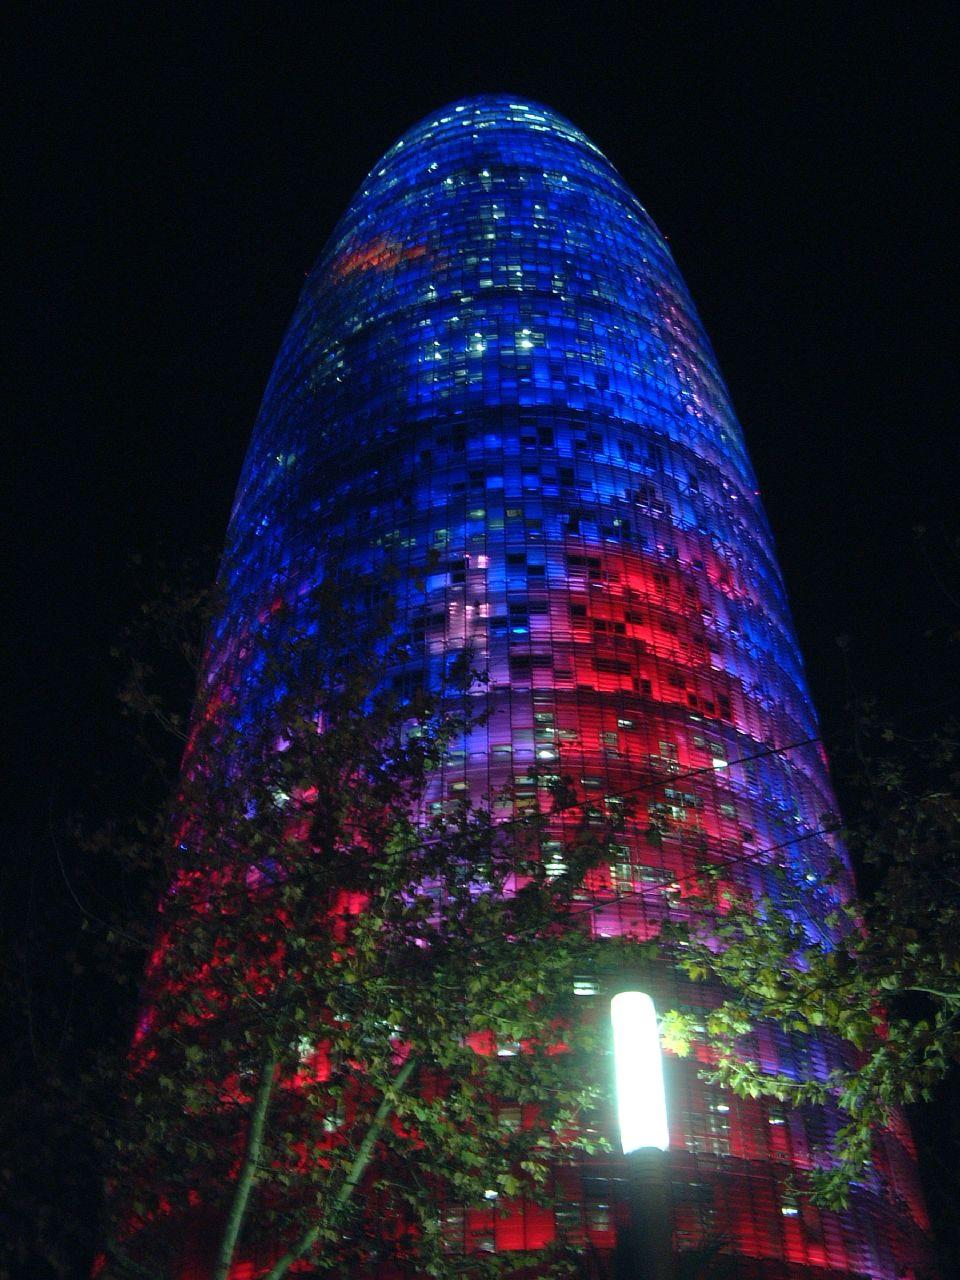 Cover image of this place Torre Agbar